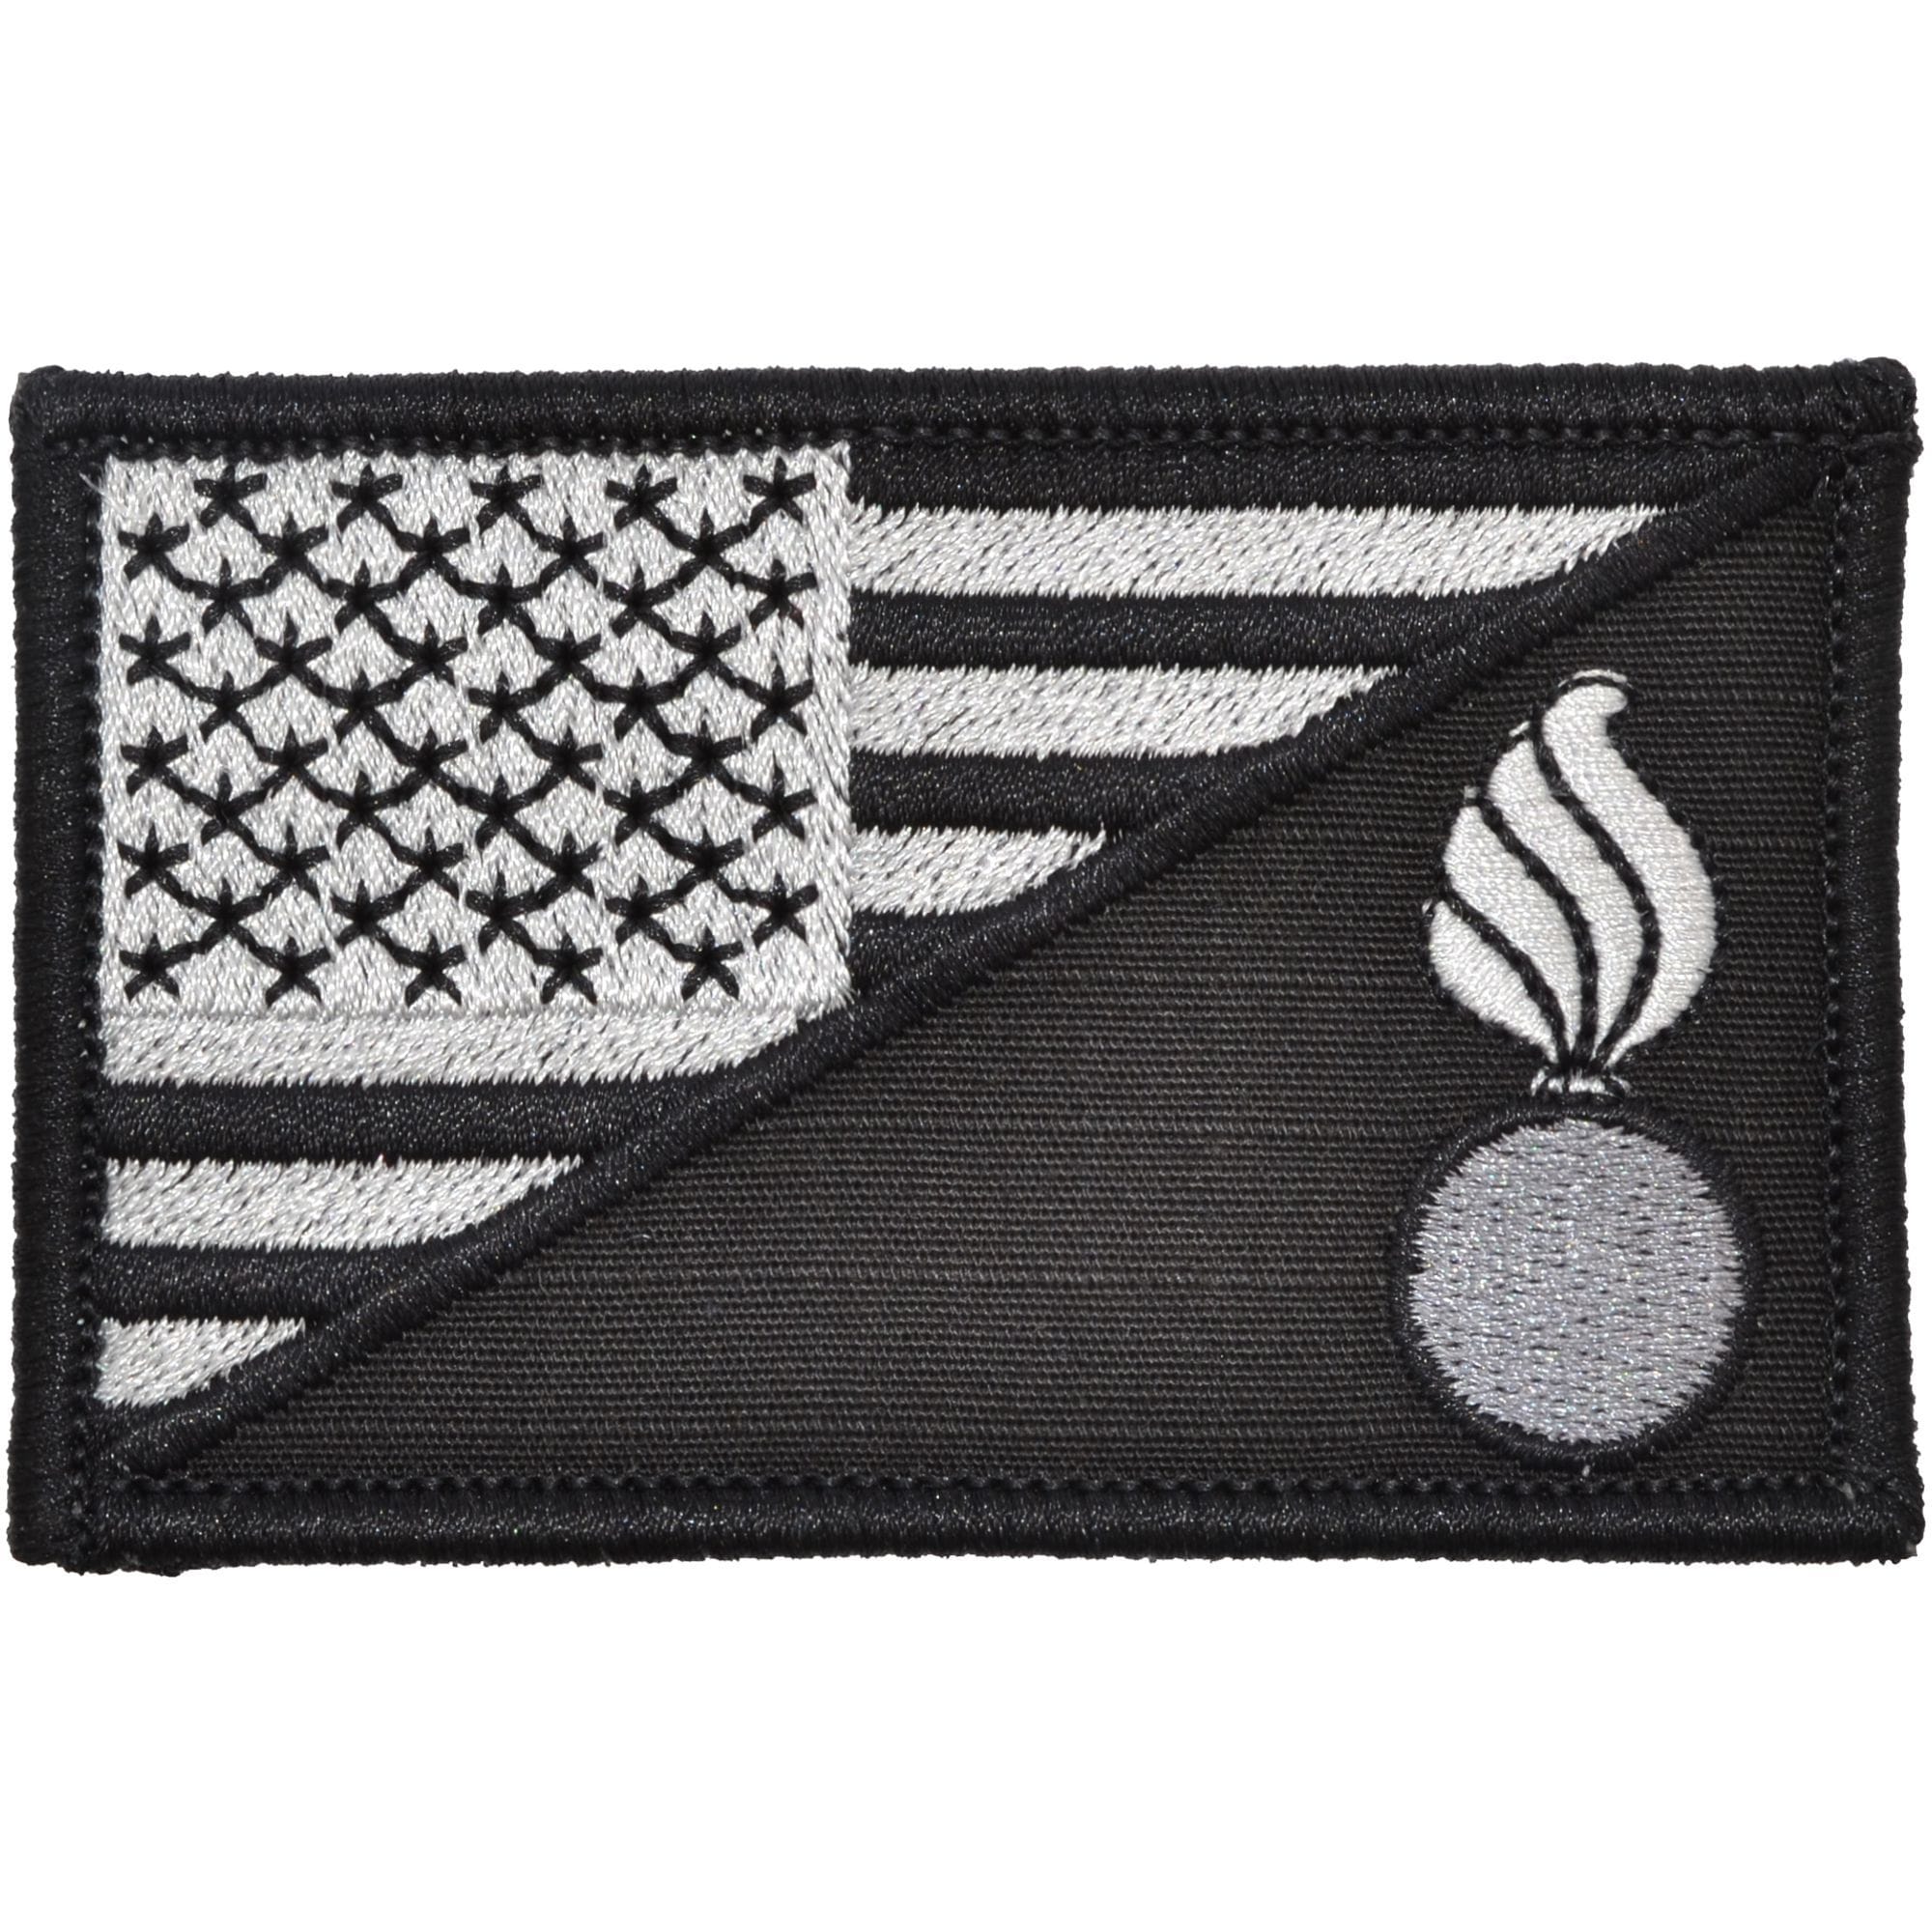 Tactical Gear Junkie Patches Black Army Ordnance Corps USA Flag - 2.25x3.5 Patch